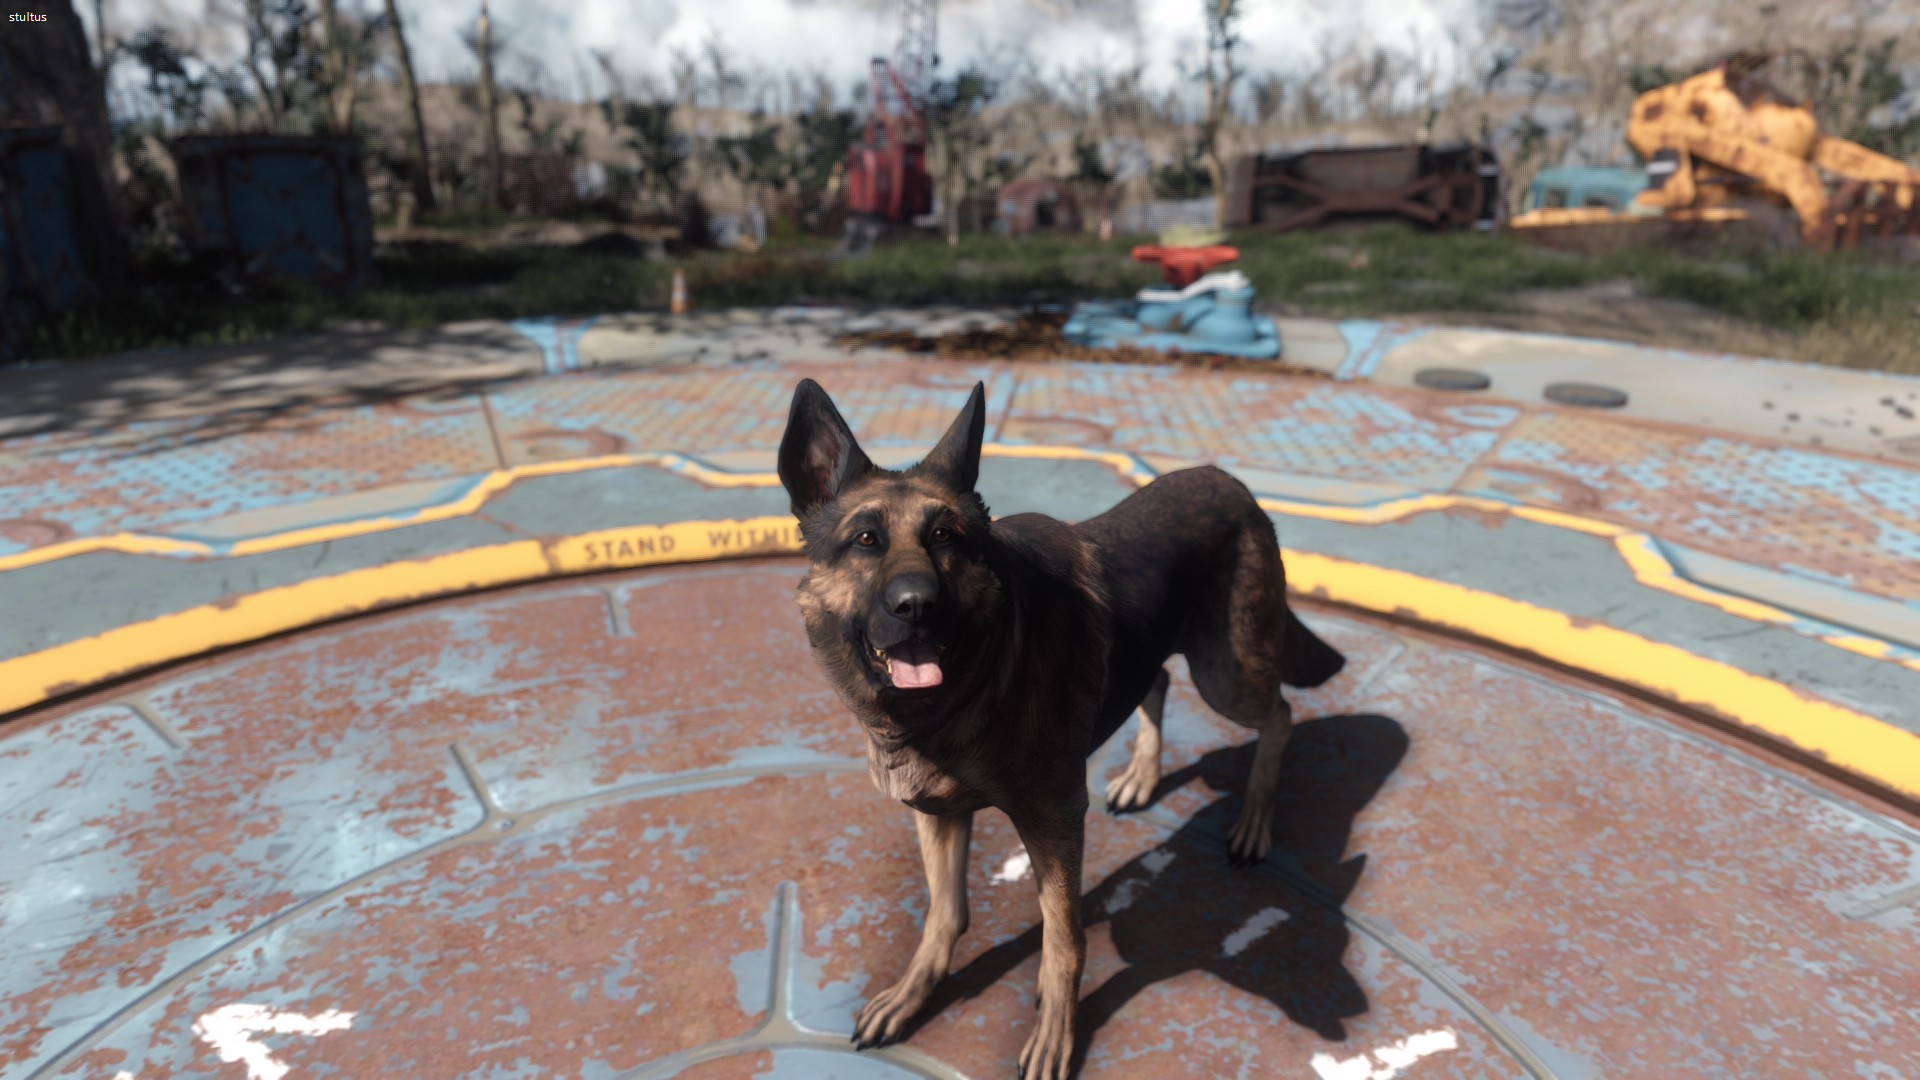 Fallout Fallout 4 Dog Dogmeat Video Games Bethesda Softworks 1920x1080